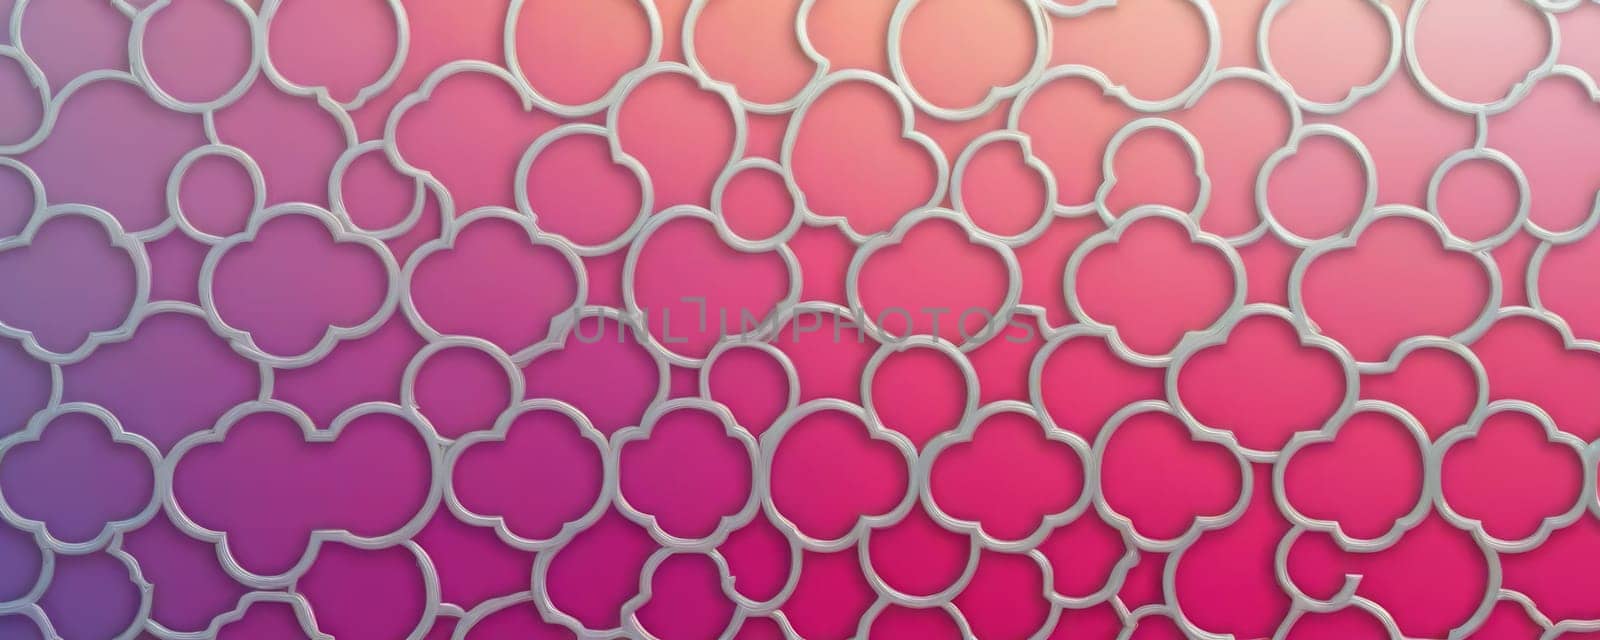 Quatrefoil Shapes in Silver Deep pink by nkotlyar